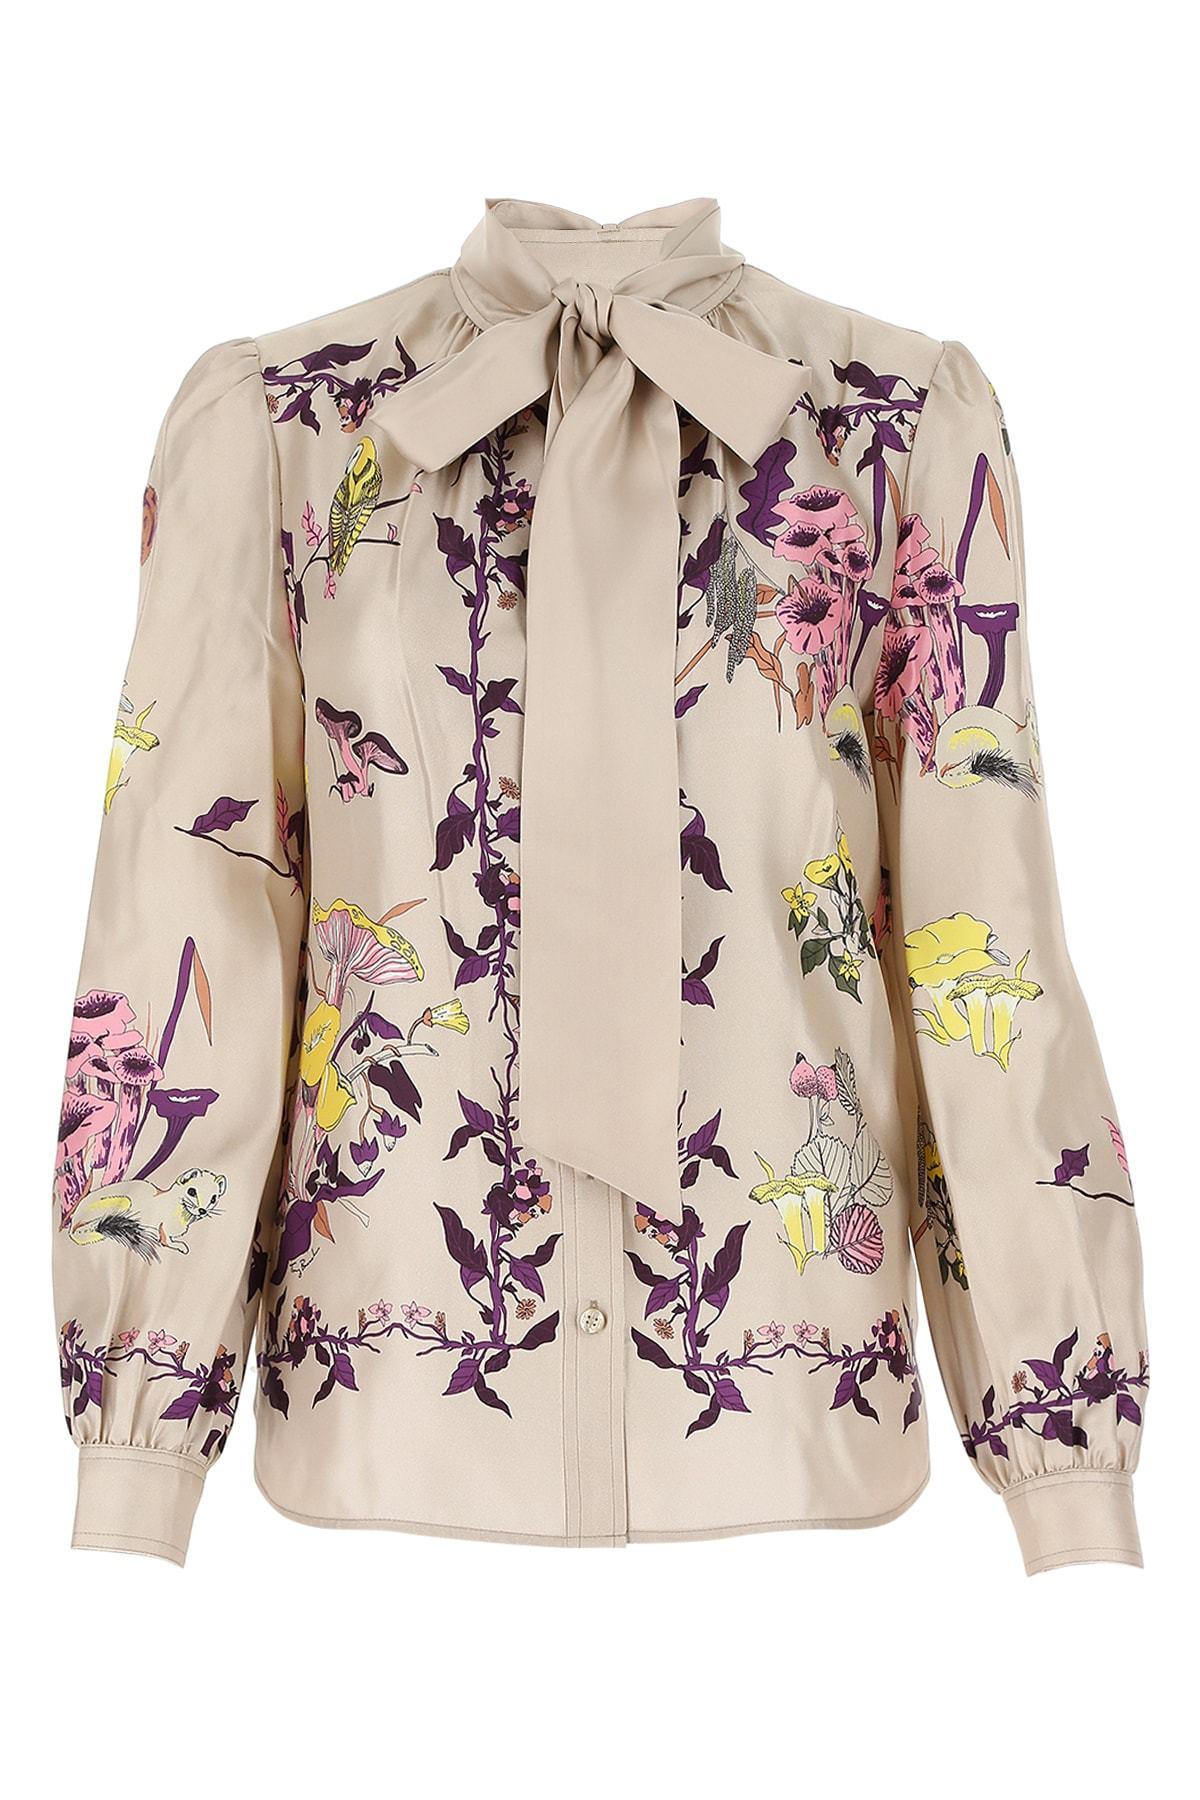 Tory Burch Mushroom Party Bow Blouse in Pink | Lyst